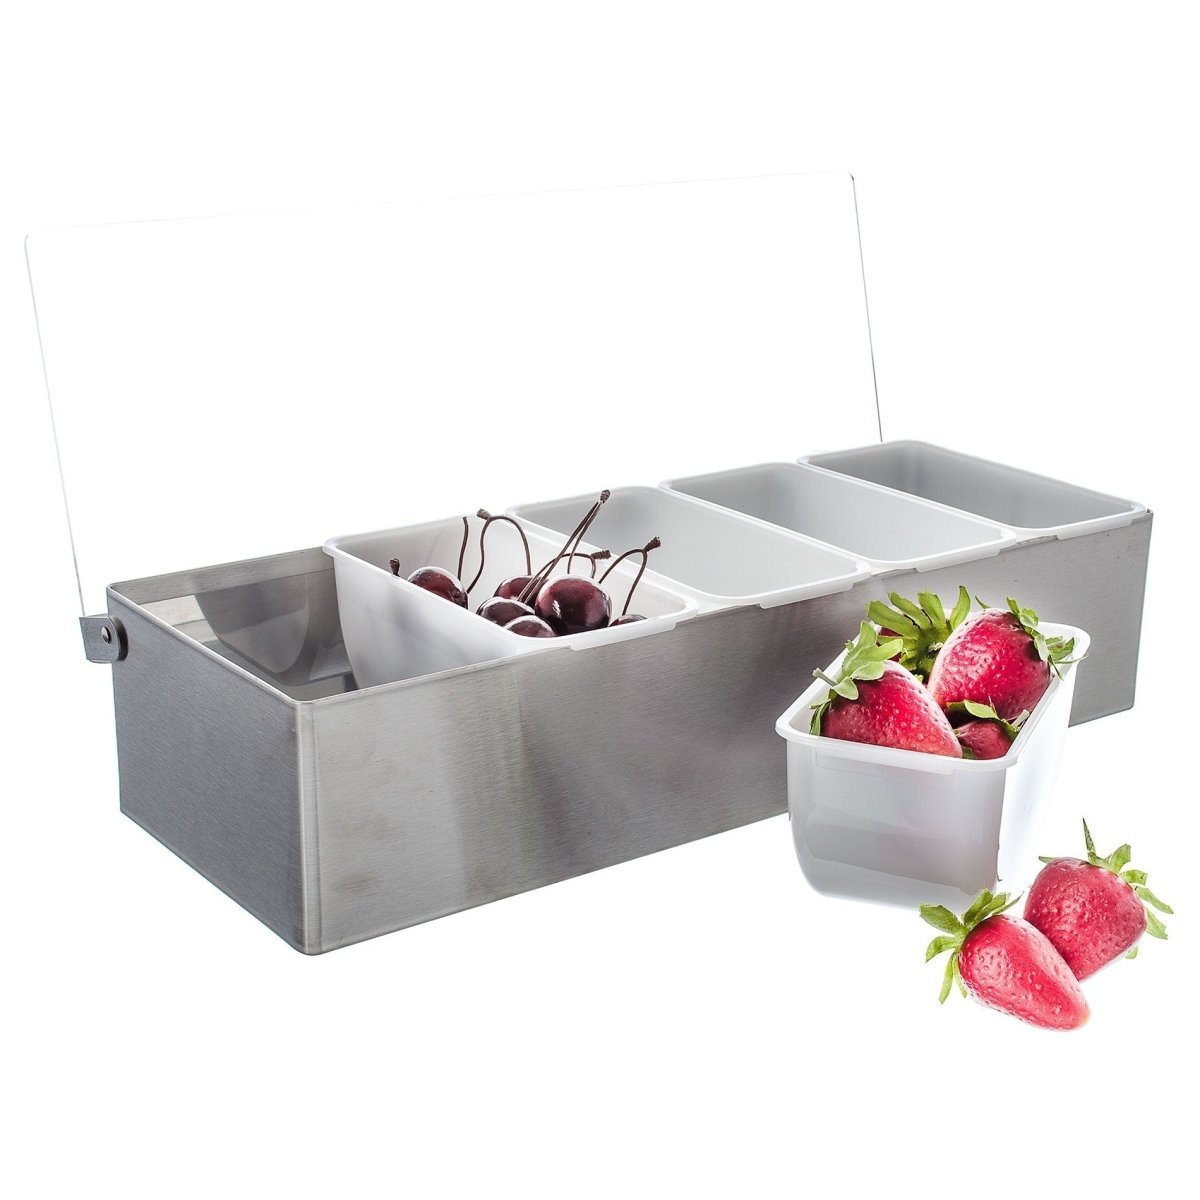 Stainless Steel Condiment Holder 5 compartment - Easiley - COND1511